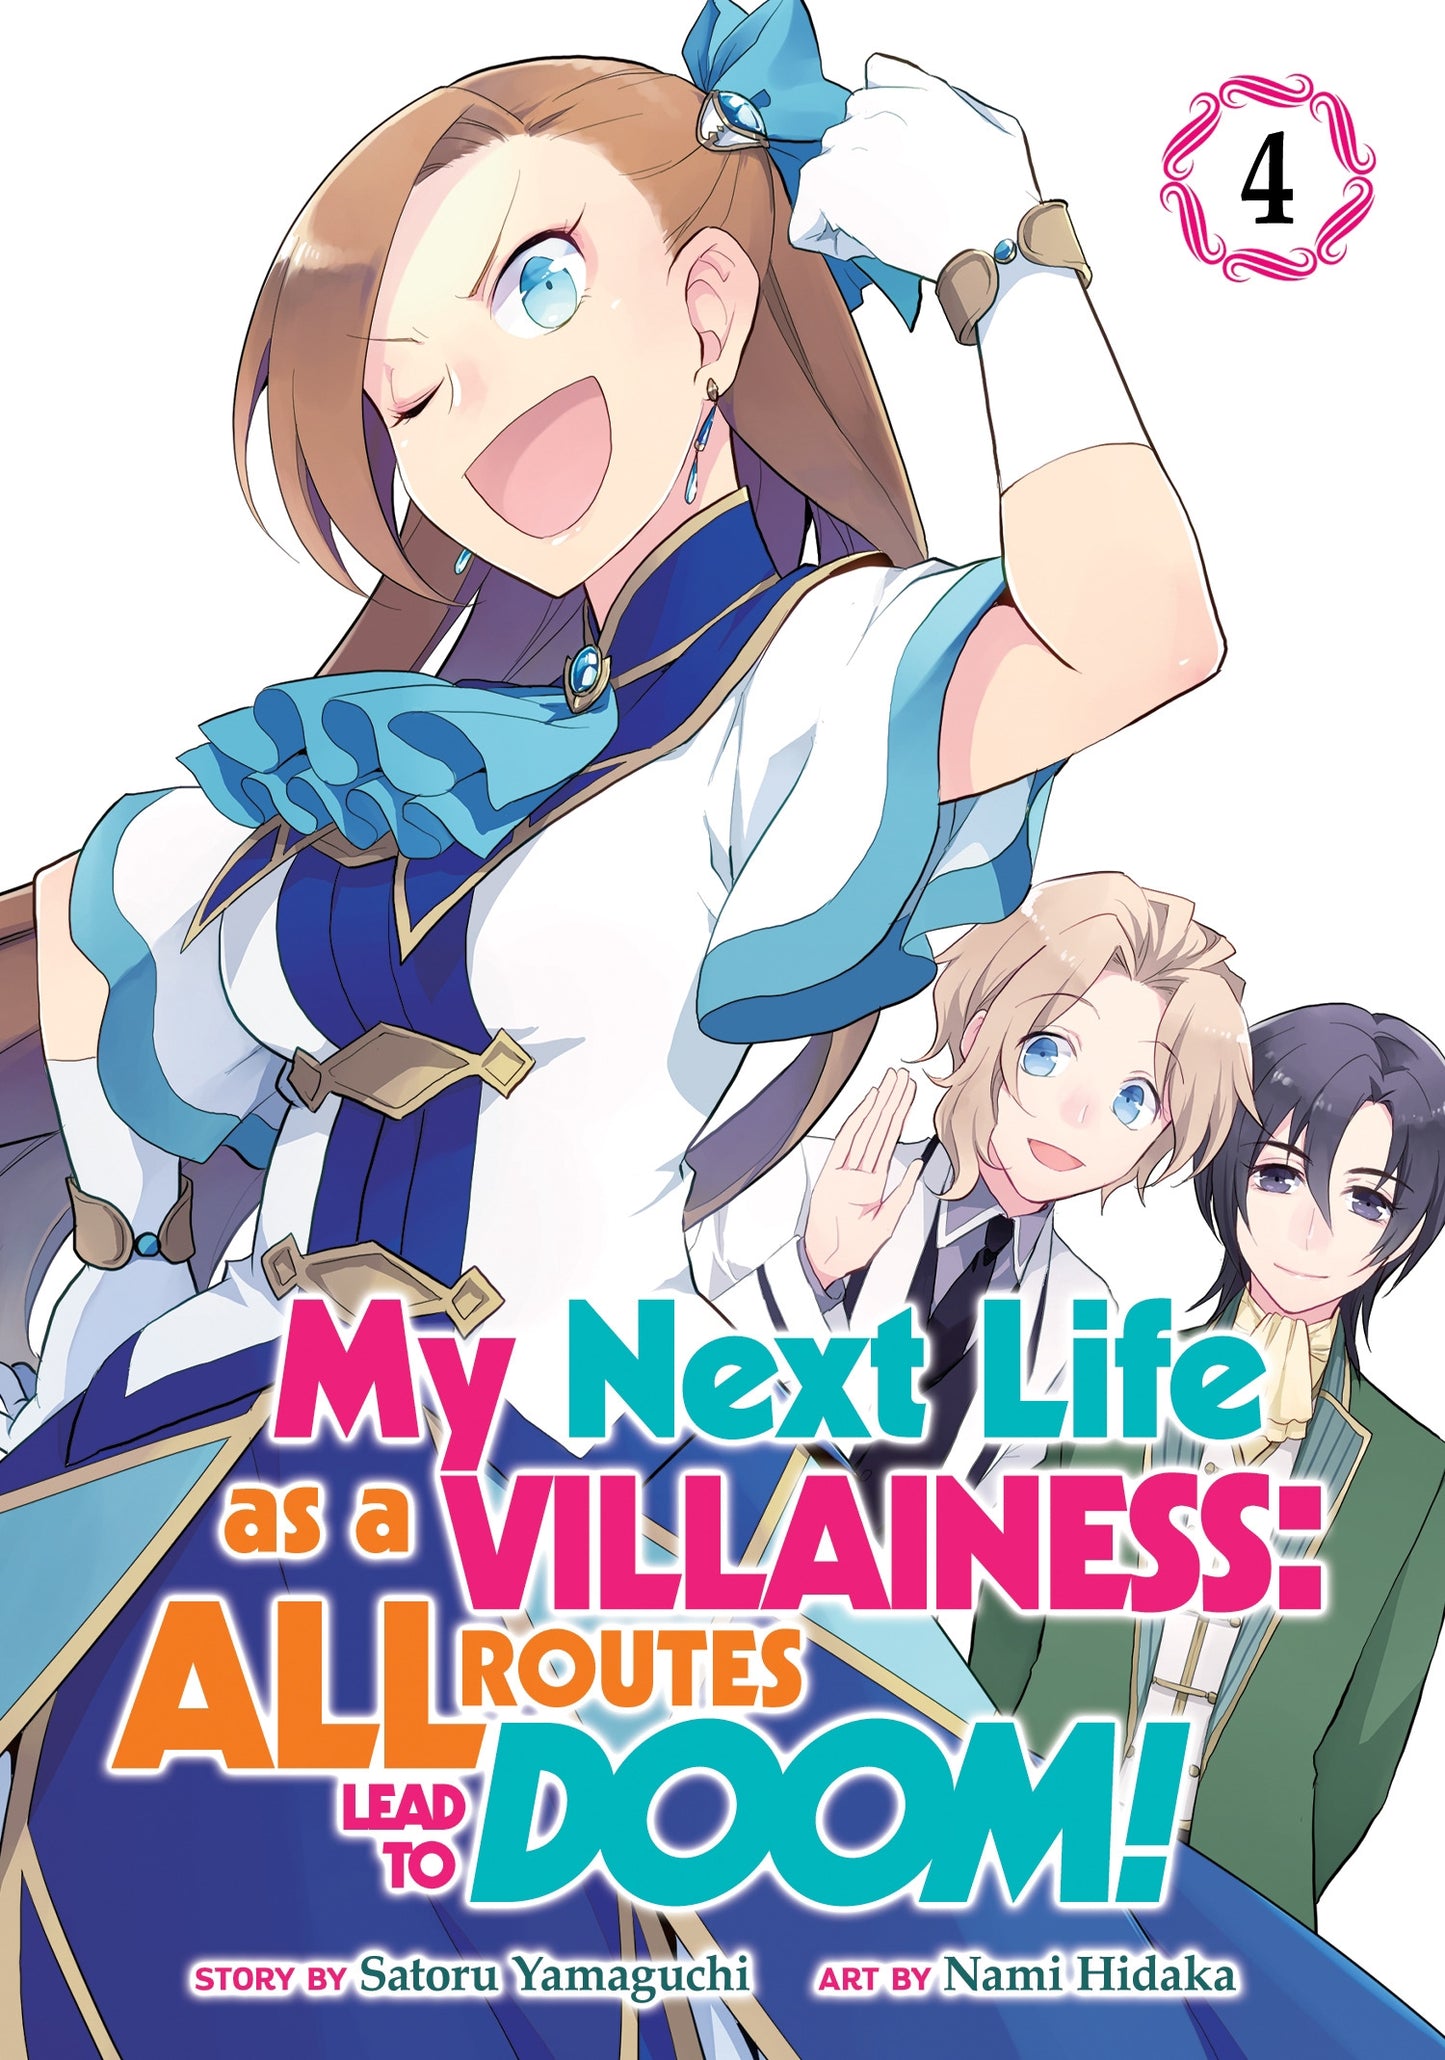 My Next Life as a Villainess All Routes Lead to Doom! (Manga) Vol. 4 - Manga Warehouse